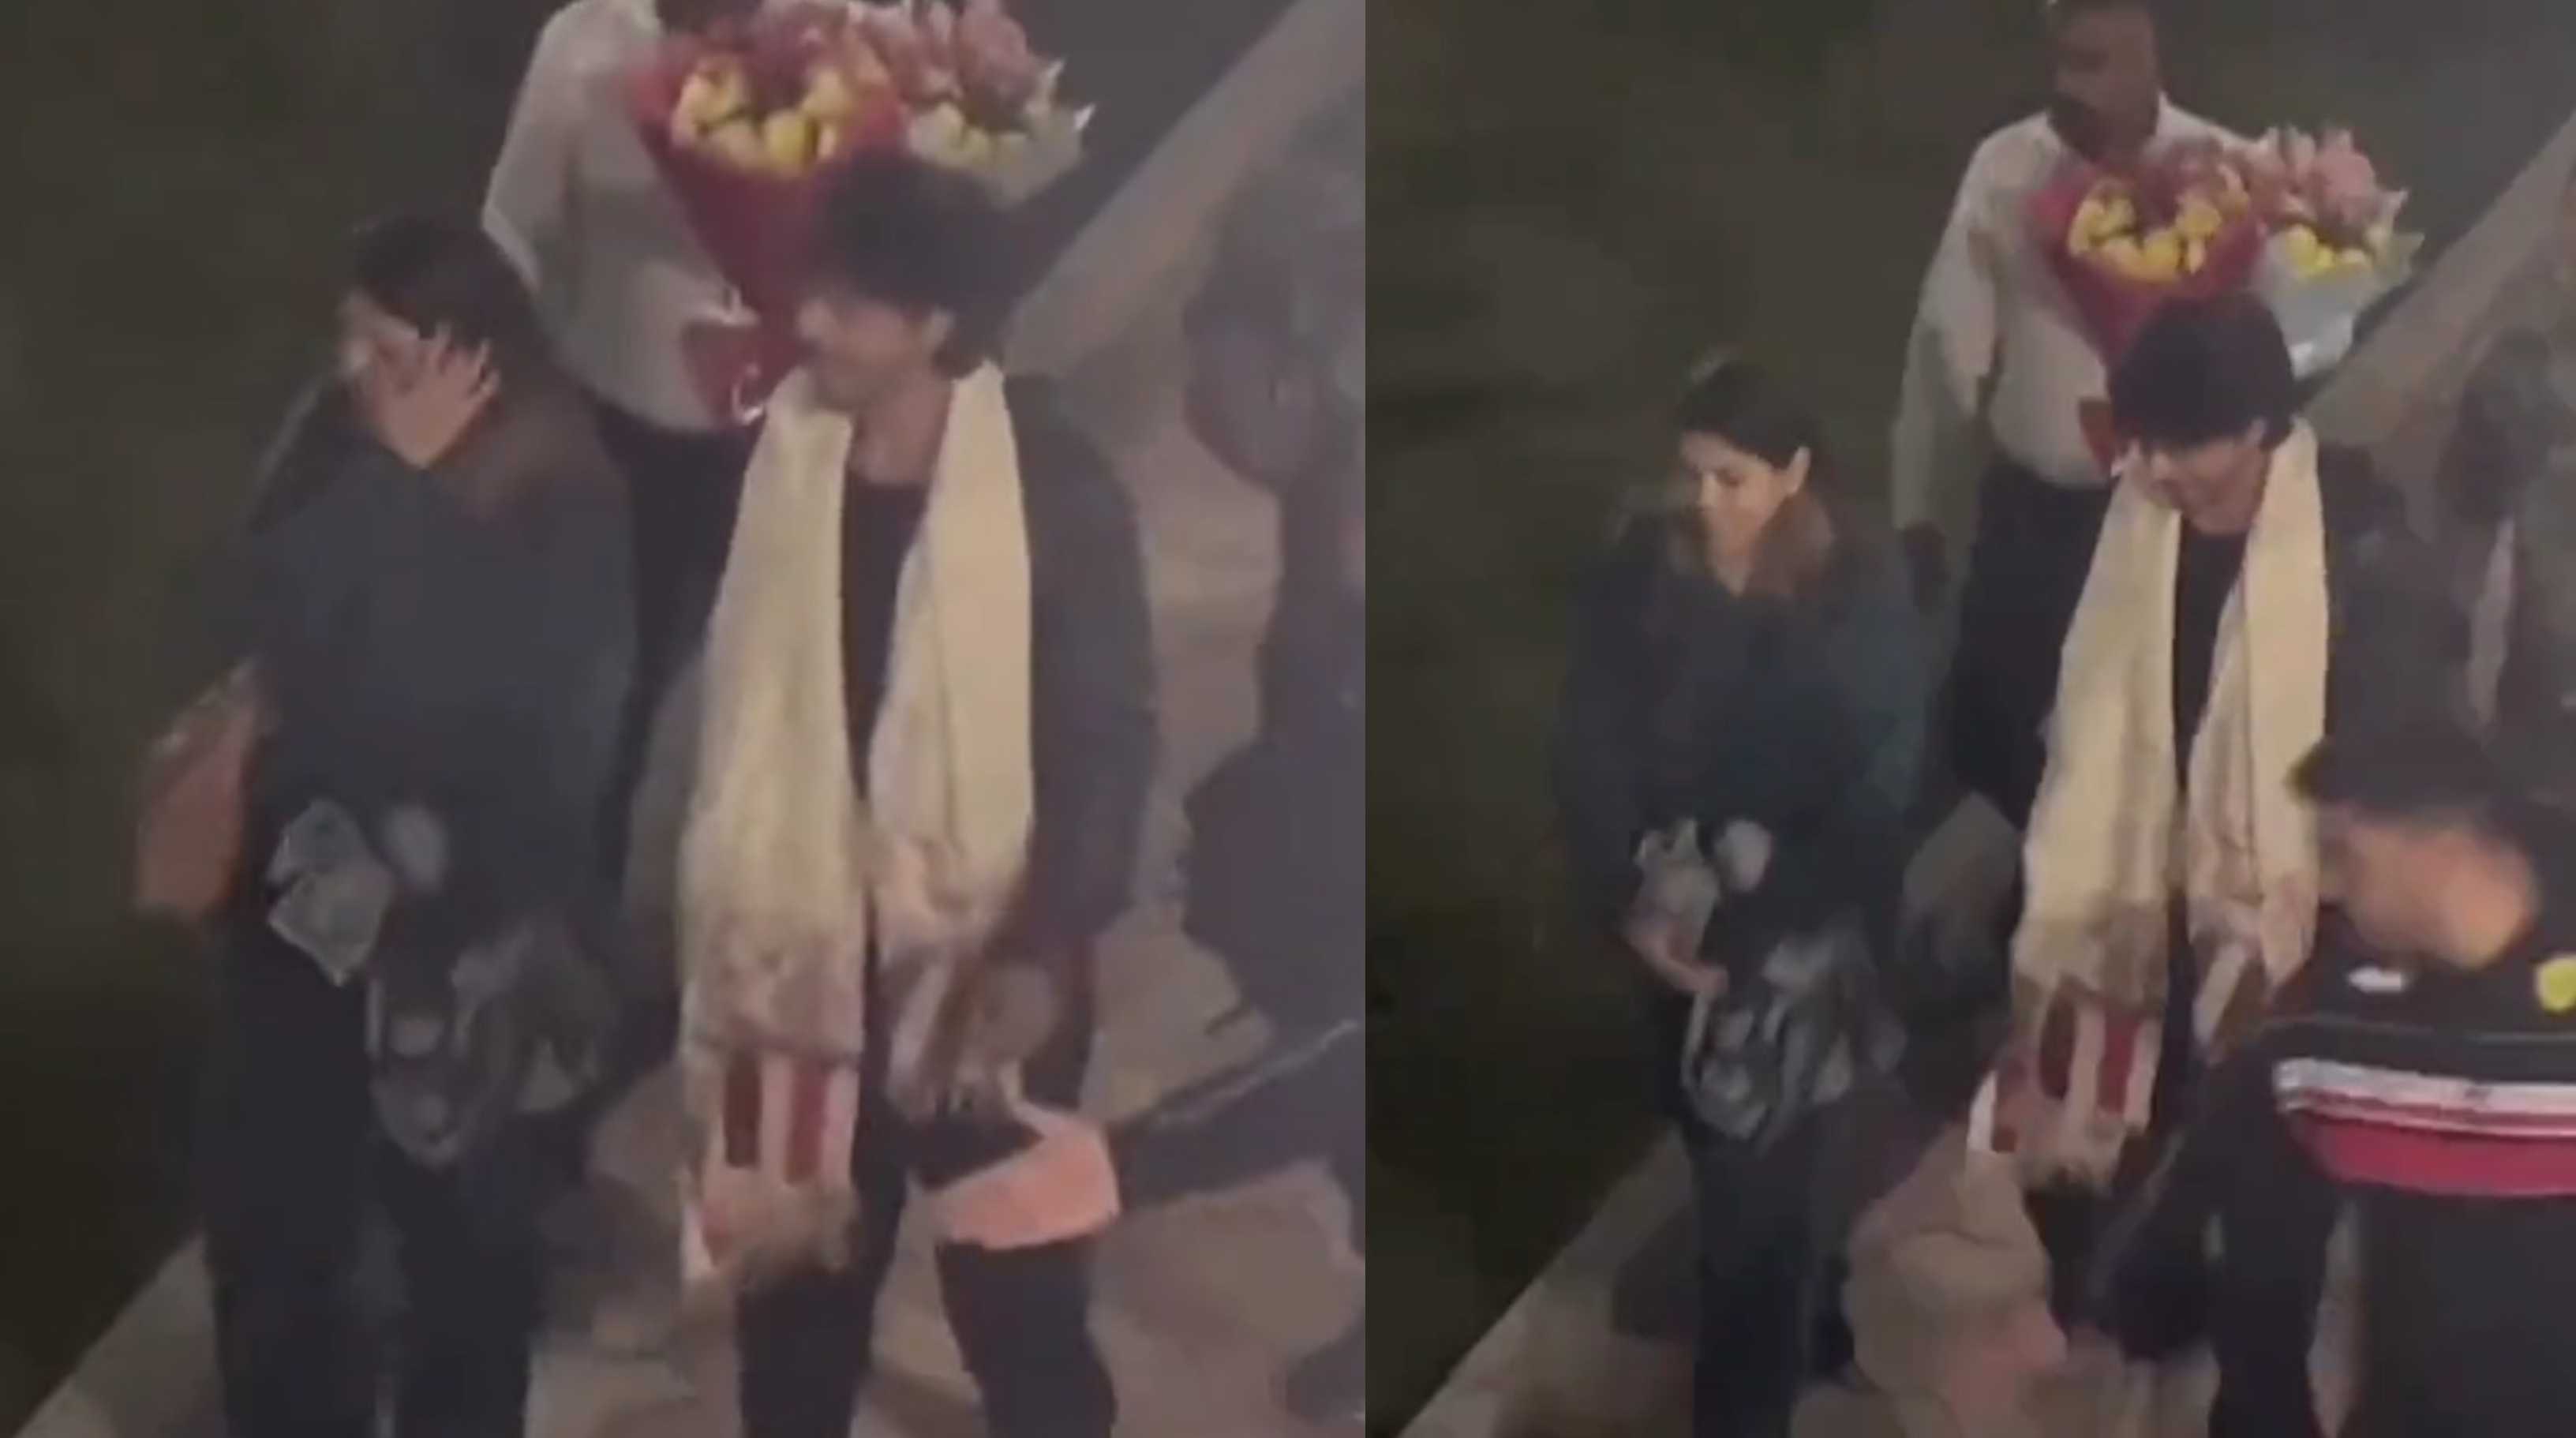 Shah Rukh Khan arrives in Kashmir for Dunki, gets a warm welcome with flowers and a shawl; watch